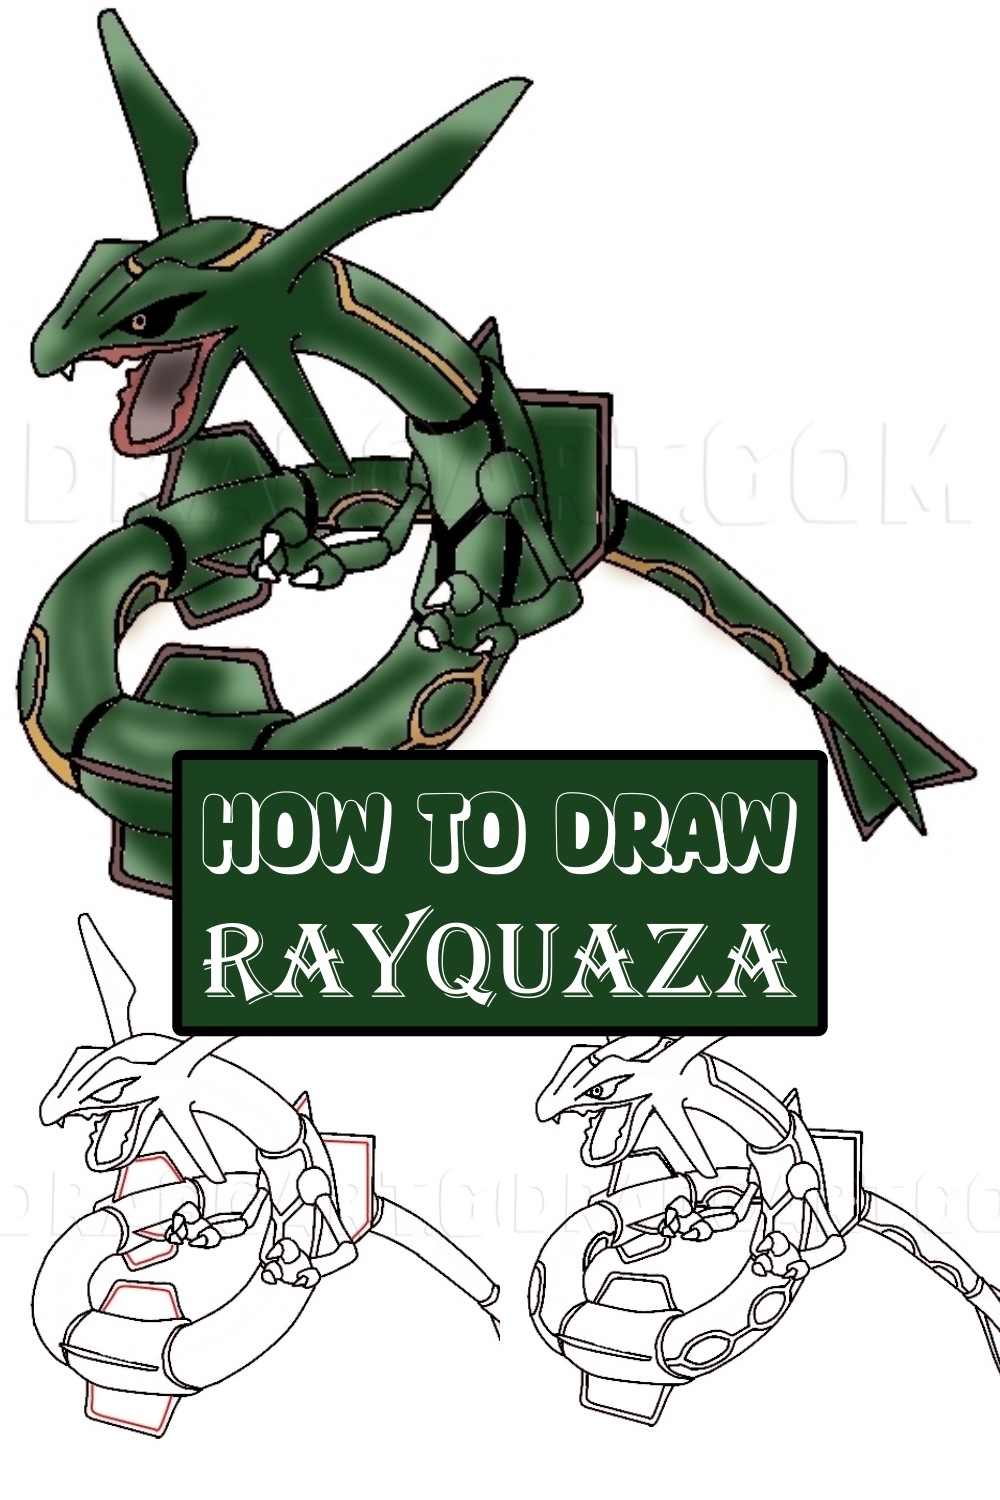 How To Draw Rayquaza